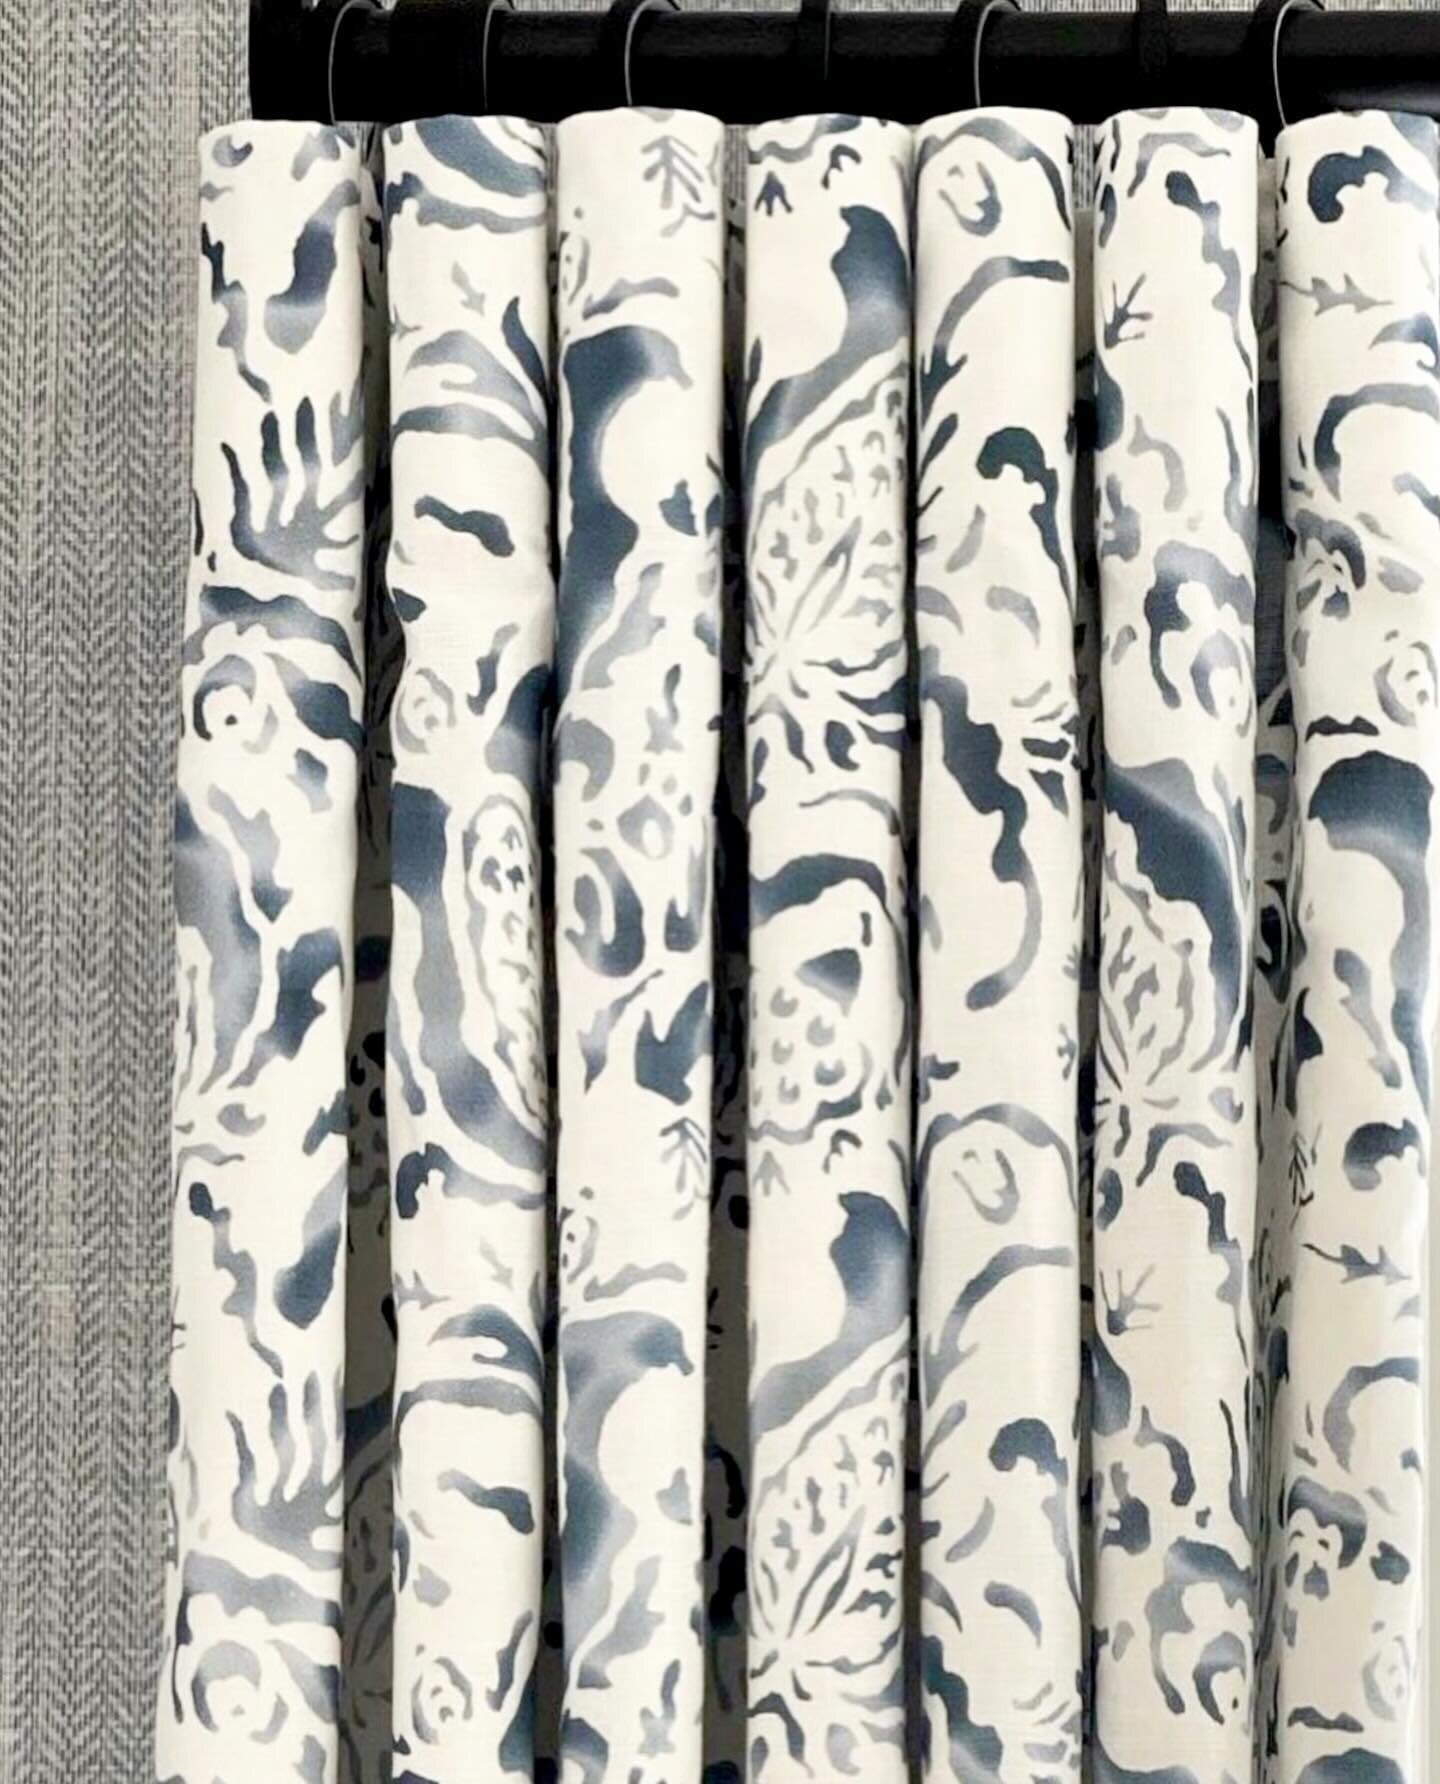 Color stories of our Piey pattern brining harmony to these spaces. From bold statements to subtle sophistication, these Piey draperies transform every room &mdash; which color story do you gravitate to?

Interior Design: 1. @larafriedmandesign , 2. @